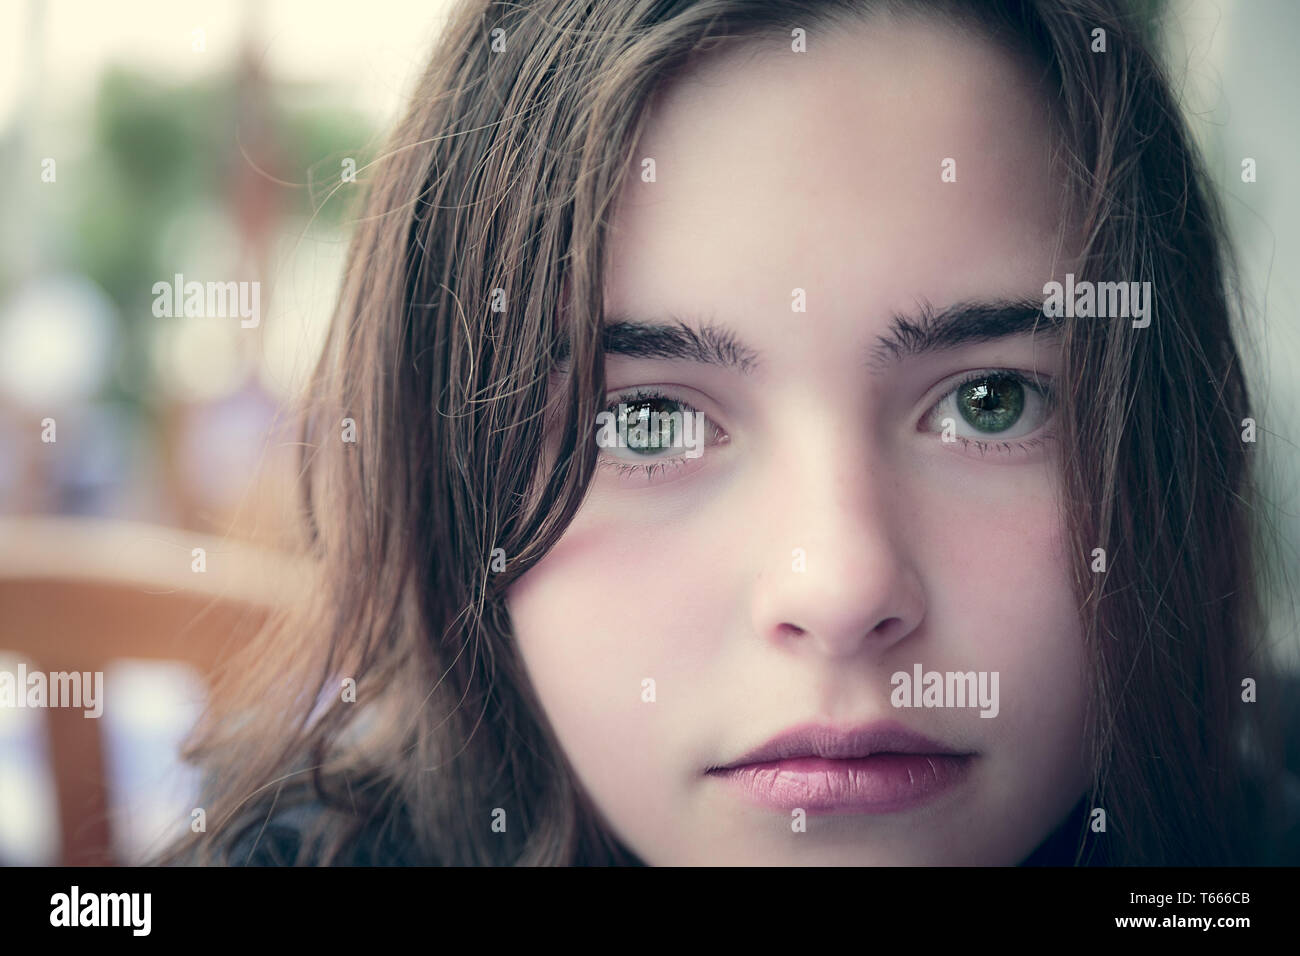 vintage close up portrait of a teenager girl Stock Photo